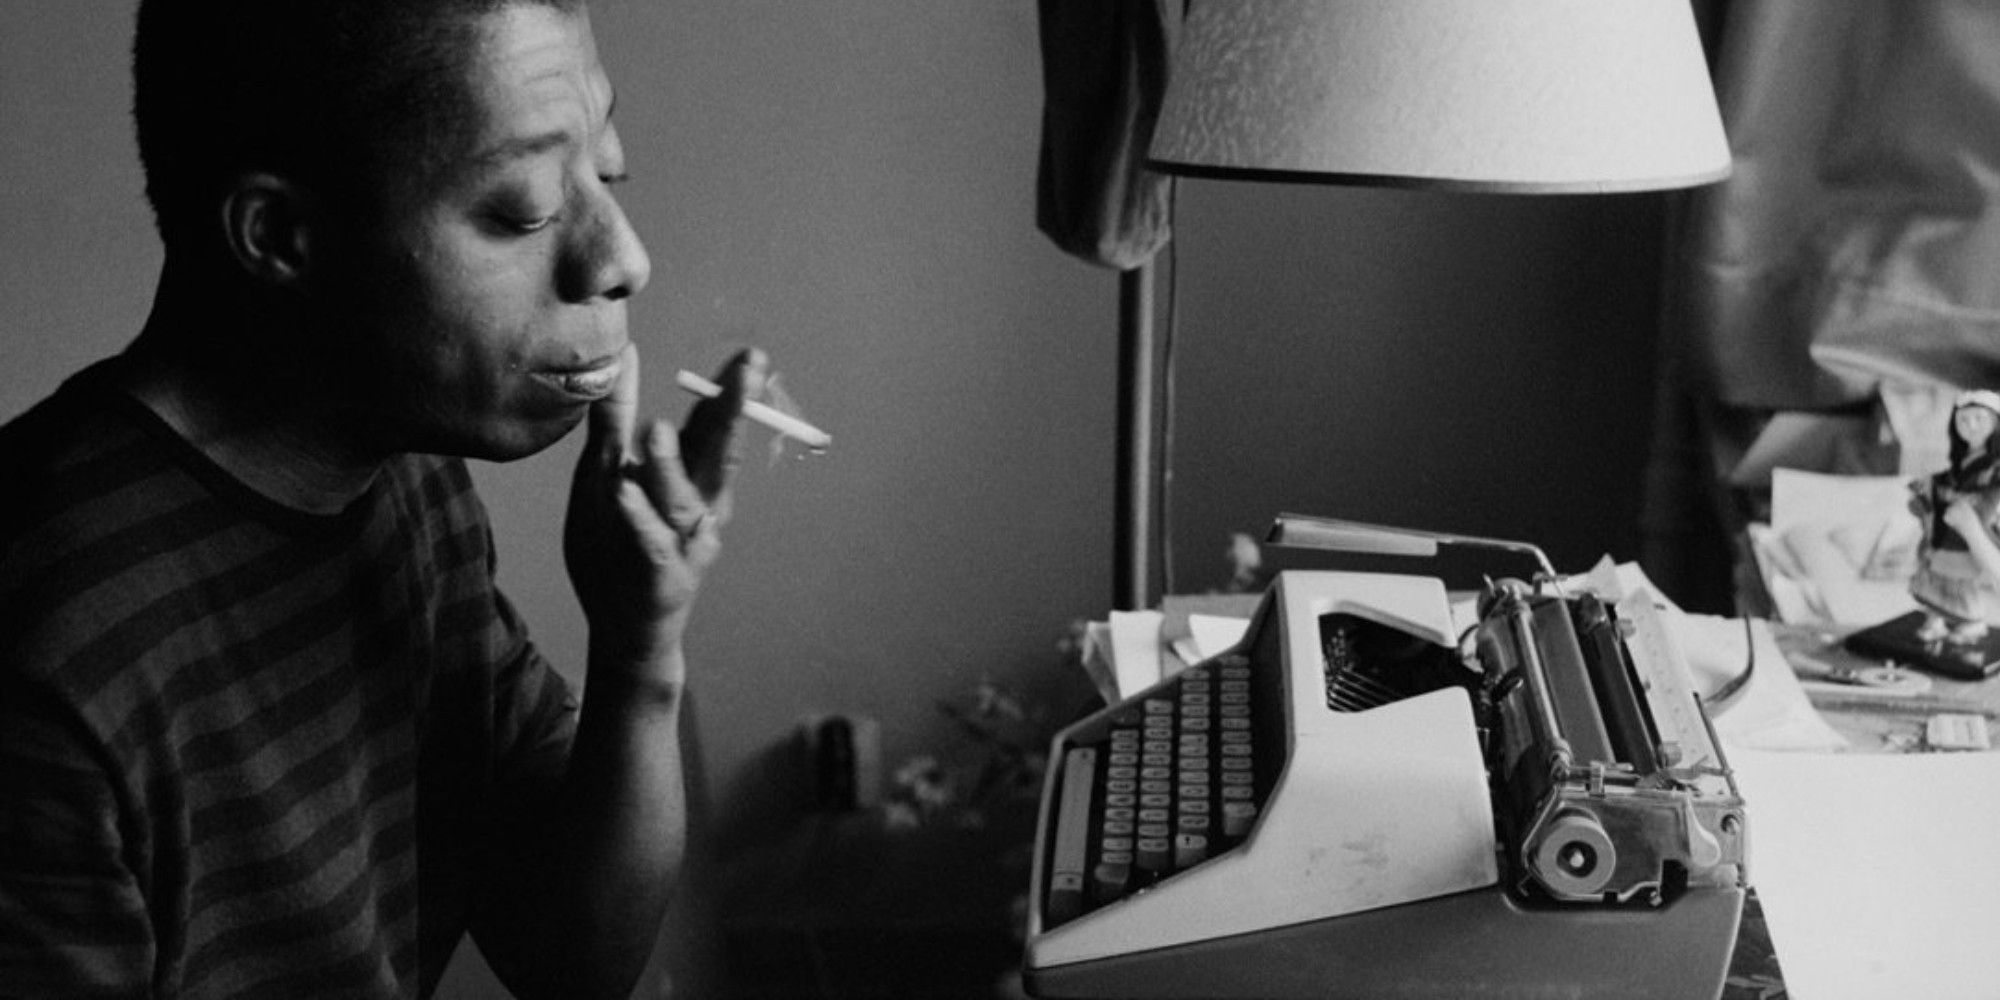 (Photo) black and white photo of a black man smoking a cigarette in front of a typewriter